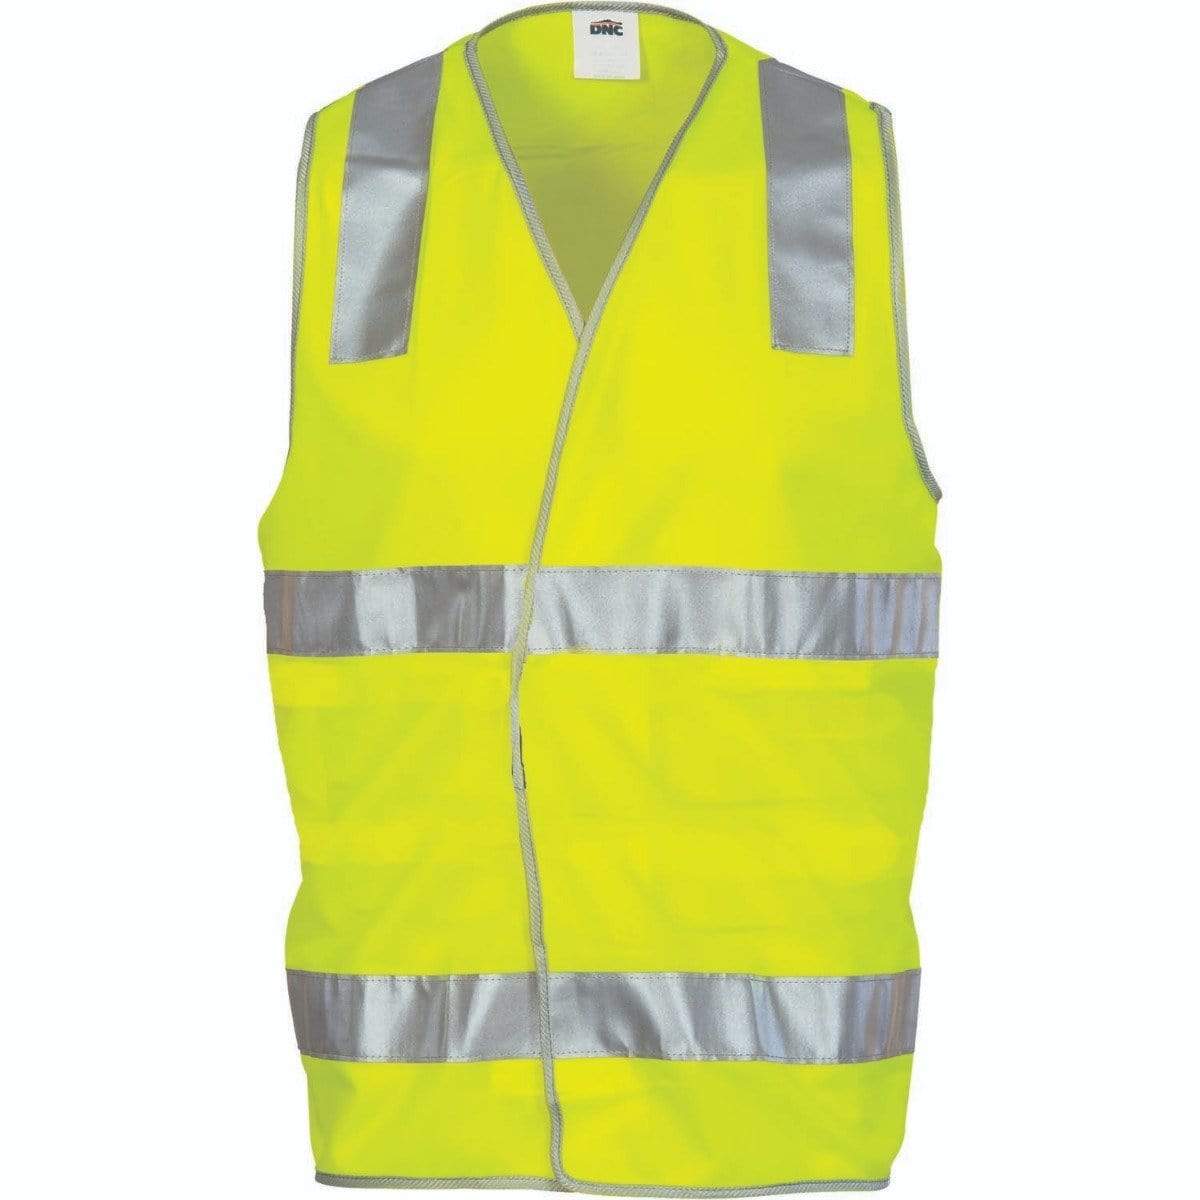 Dnc Workwear Day/night Safety Vest With Hoop & Shoulder Generic R/tape - 3503 Work Wear DNC Workwear Yellow XS 